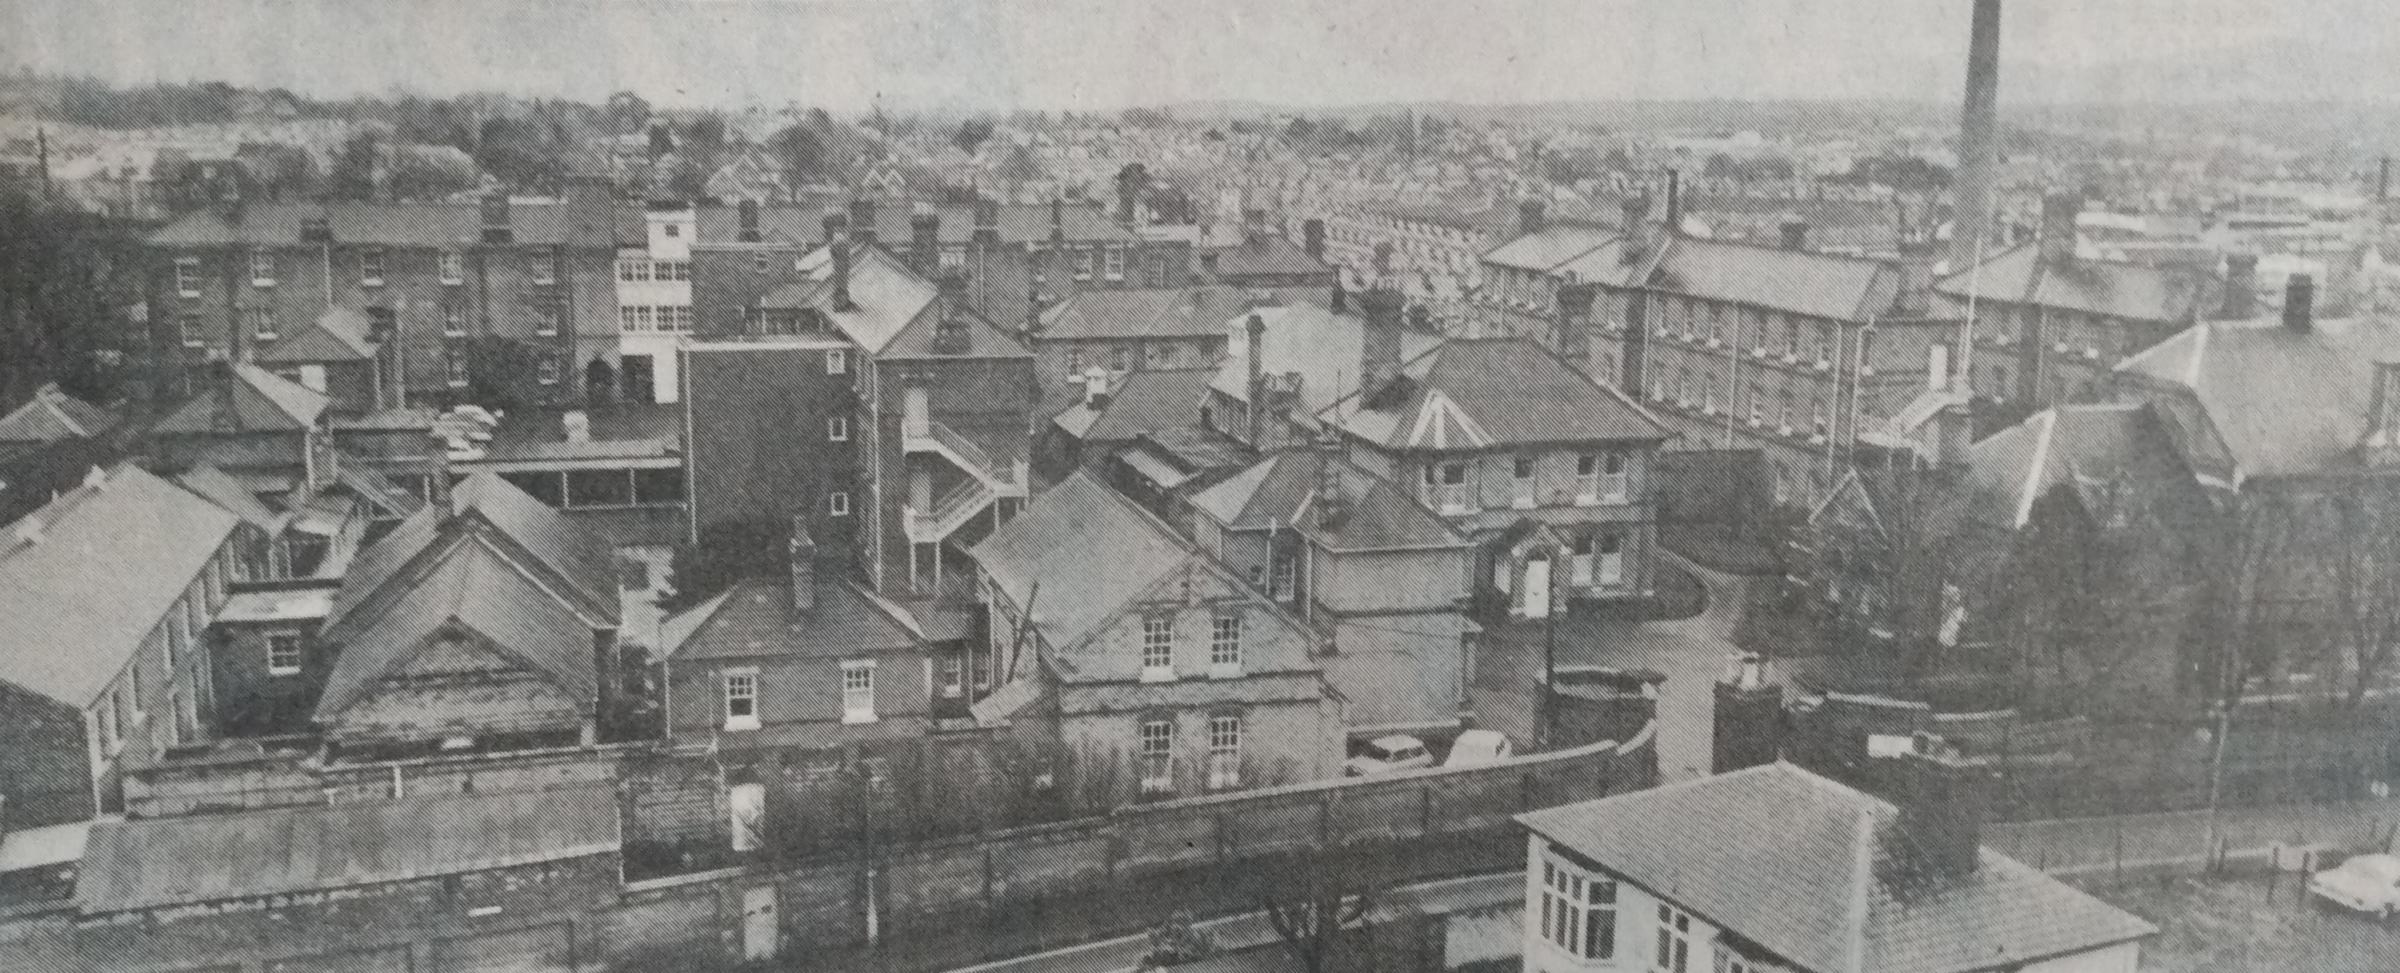 This picture dates from 1976 and shows the considerable extent of the Hillborough range of buildings